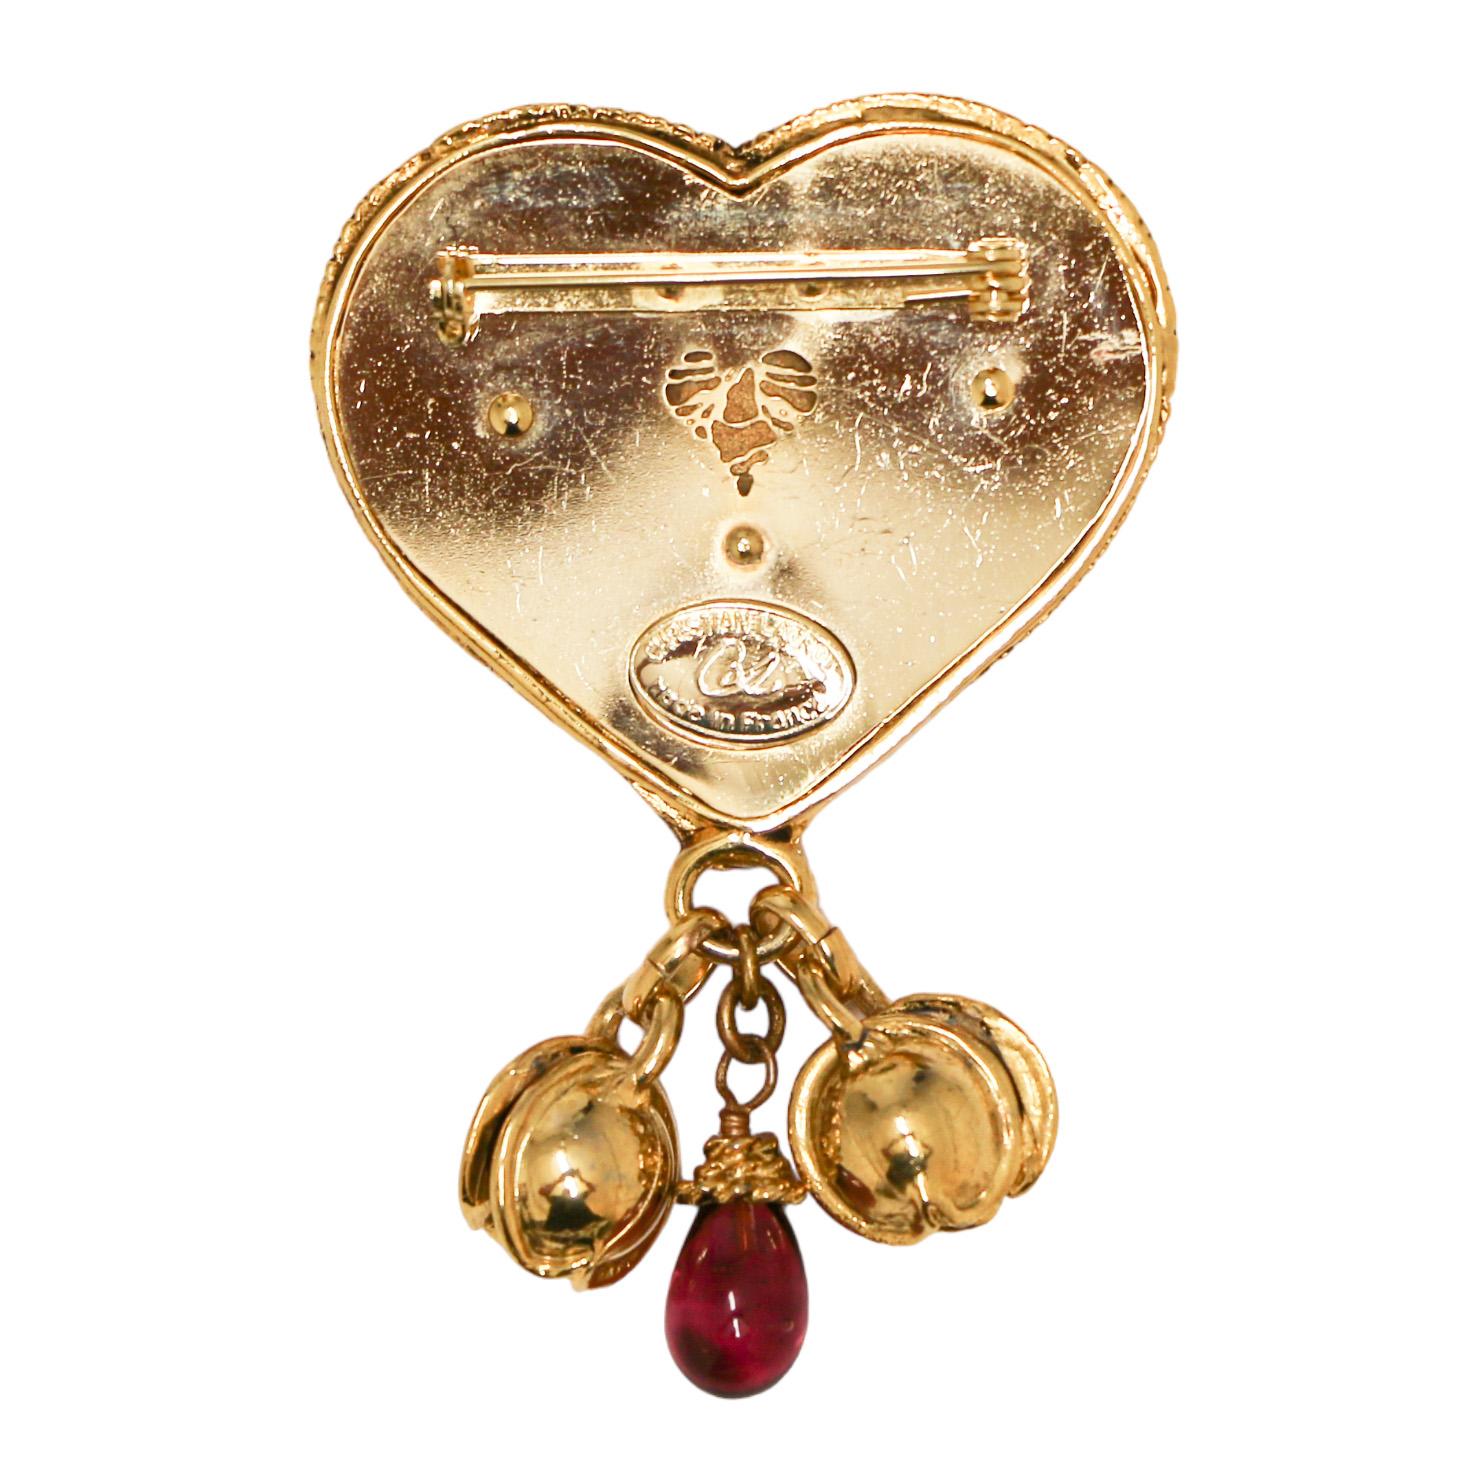 very good condition
Made in France
gold metal
Color: gold
Dimensions: 5.5 x 8 cm
Stamp : yes
Vintage Heart signed Christian Lacroix, two small golden bells and a small amethyst glass bead. Micro-scratches on the jewelry.